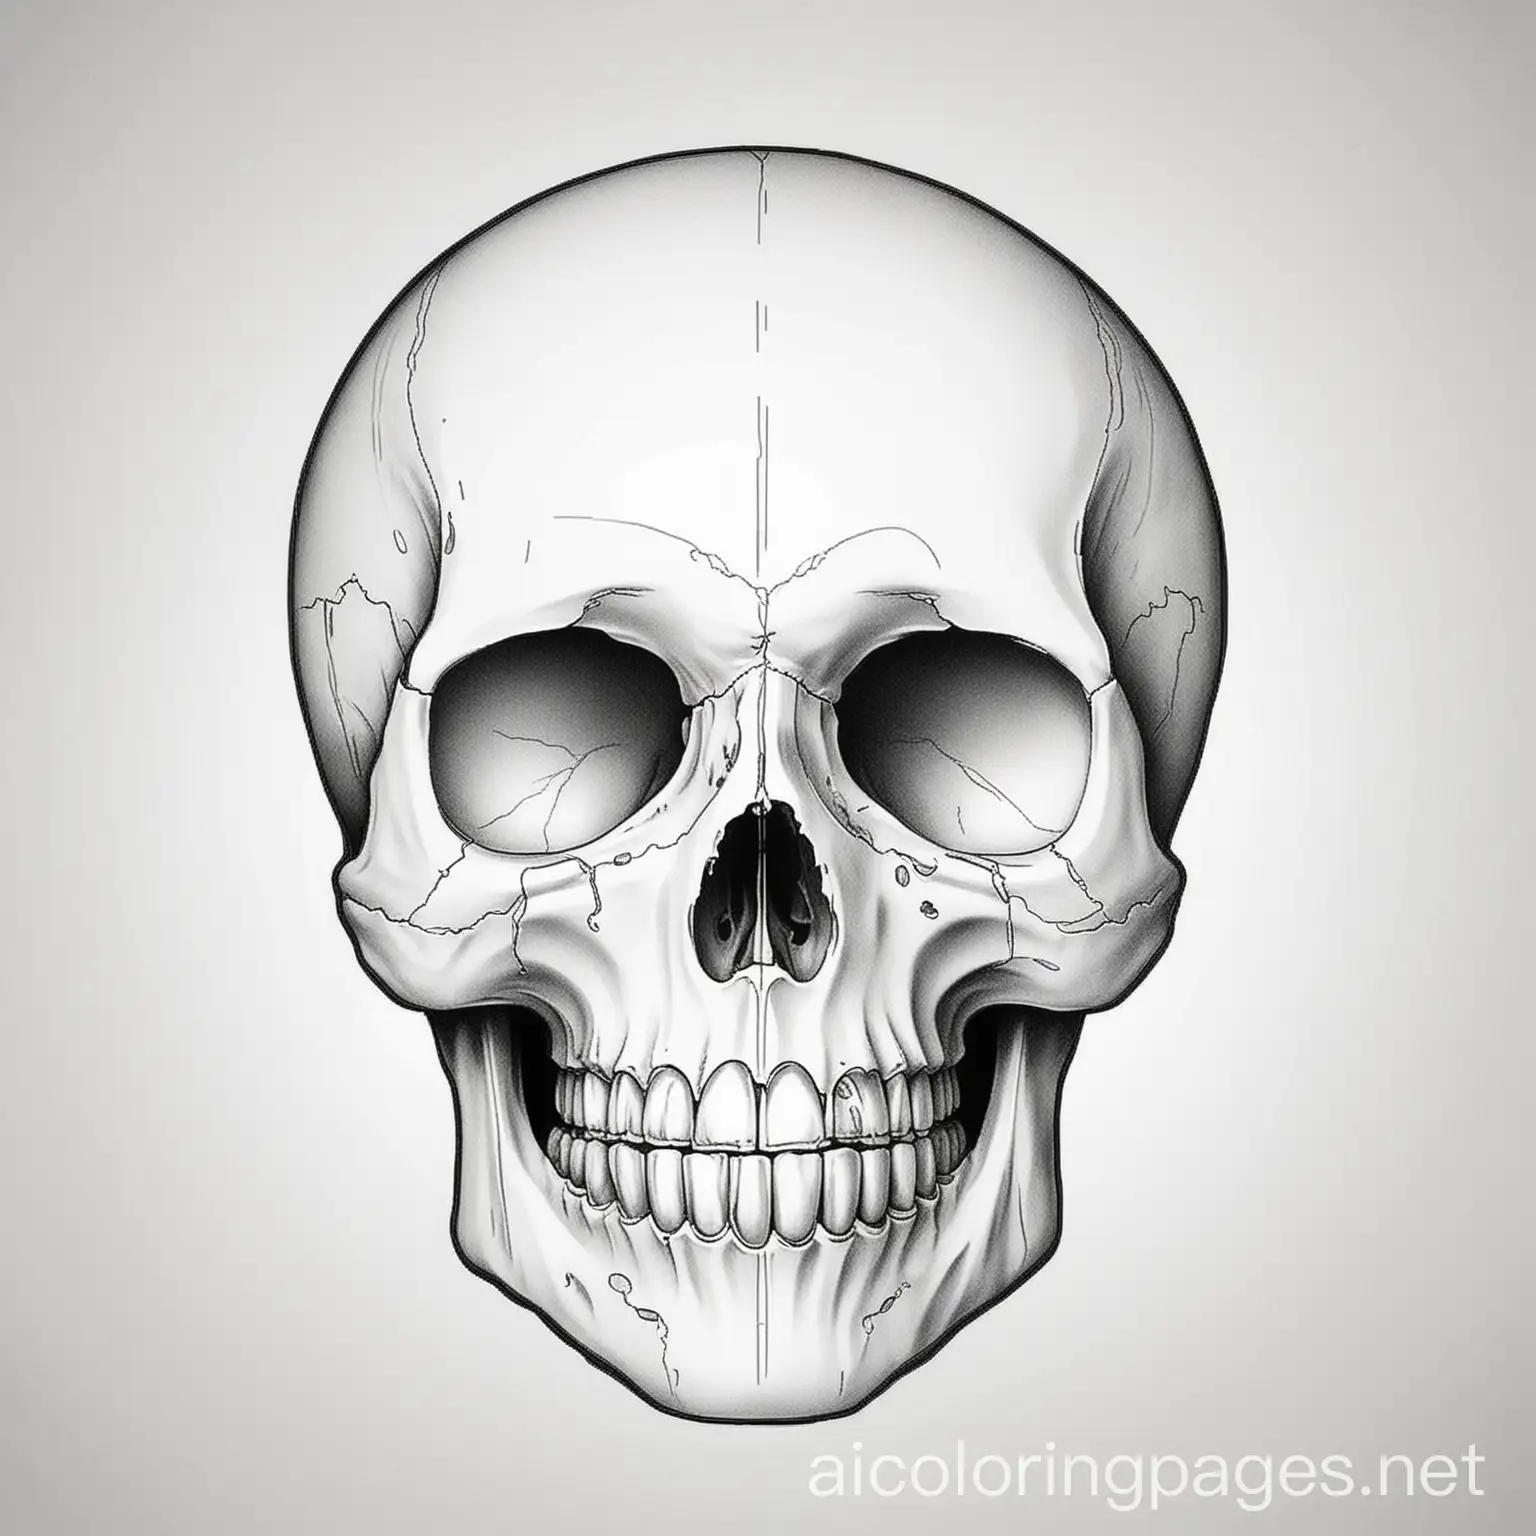 skull, Coloring Page, black and white, line art, white background, Simplicity, Ample White Space. The background of the coloring page is plain white to make it easy for young children to color within the lines. The outlines of all the subjects are easy to distinguish, making it simple for kids to color without too much difficulty